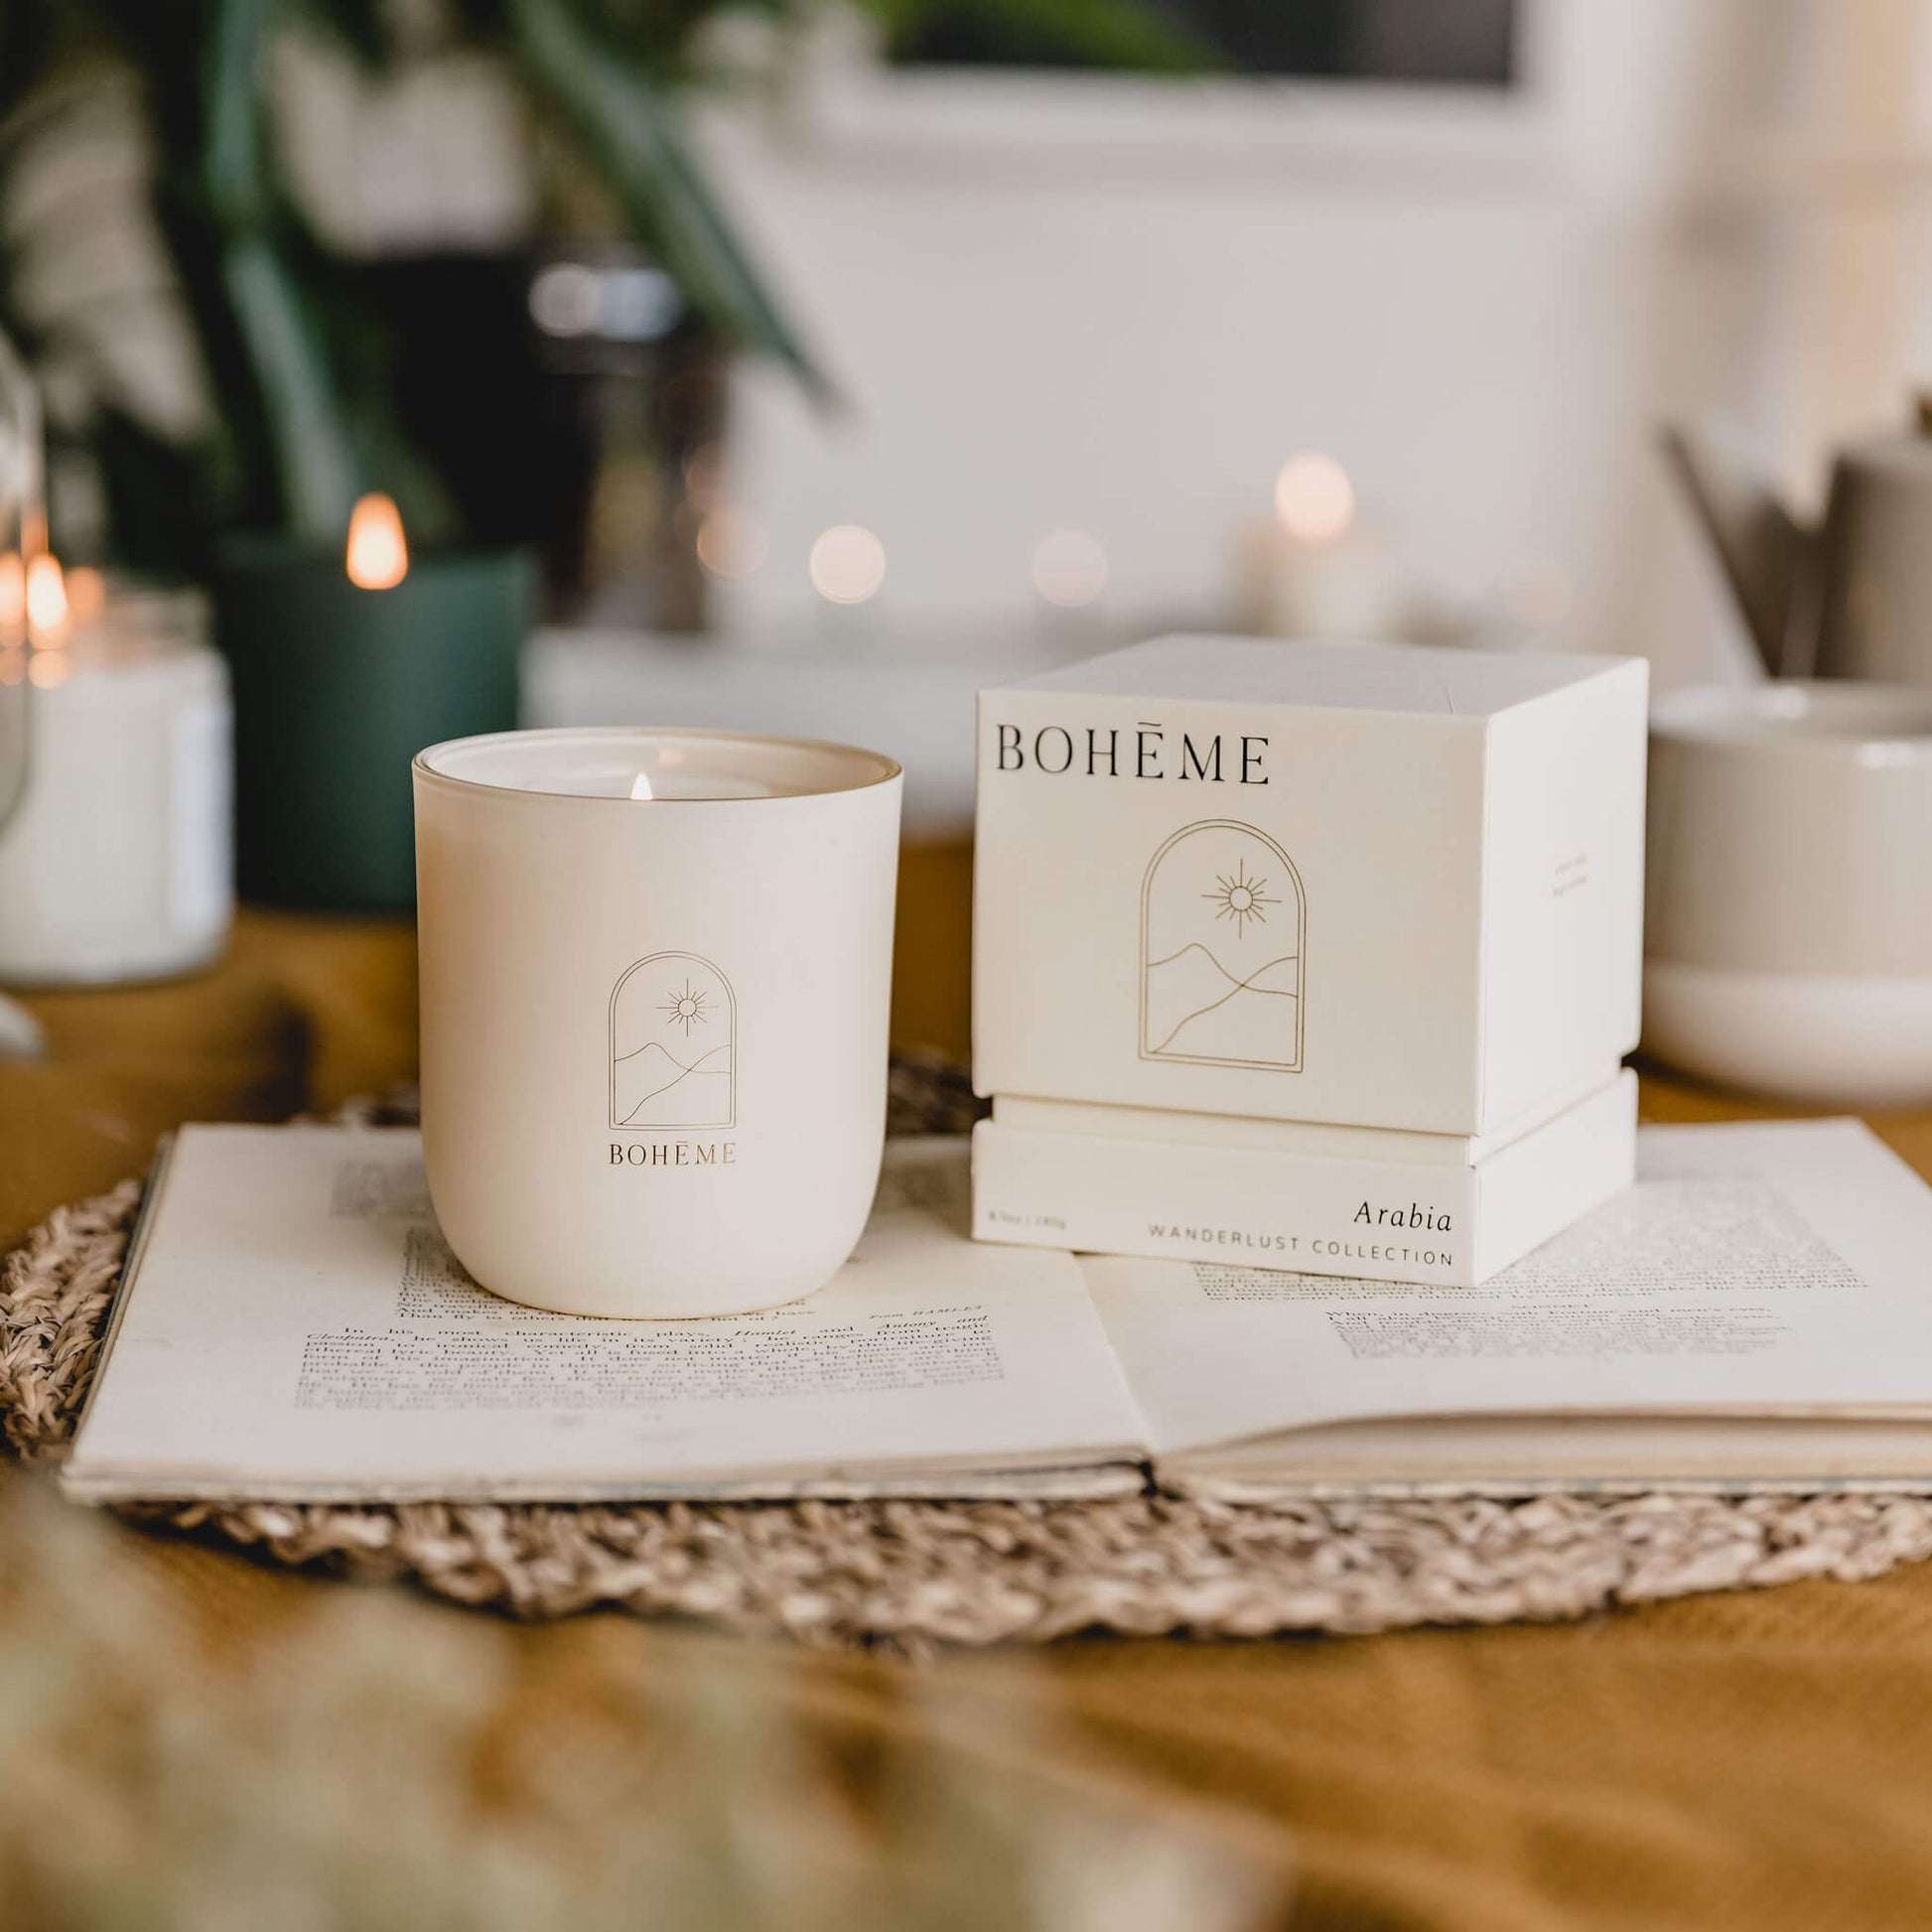 Arabia Scented Candle by Boheme